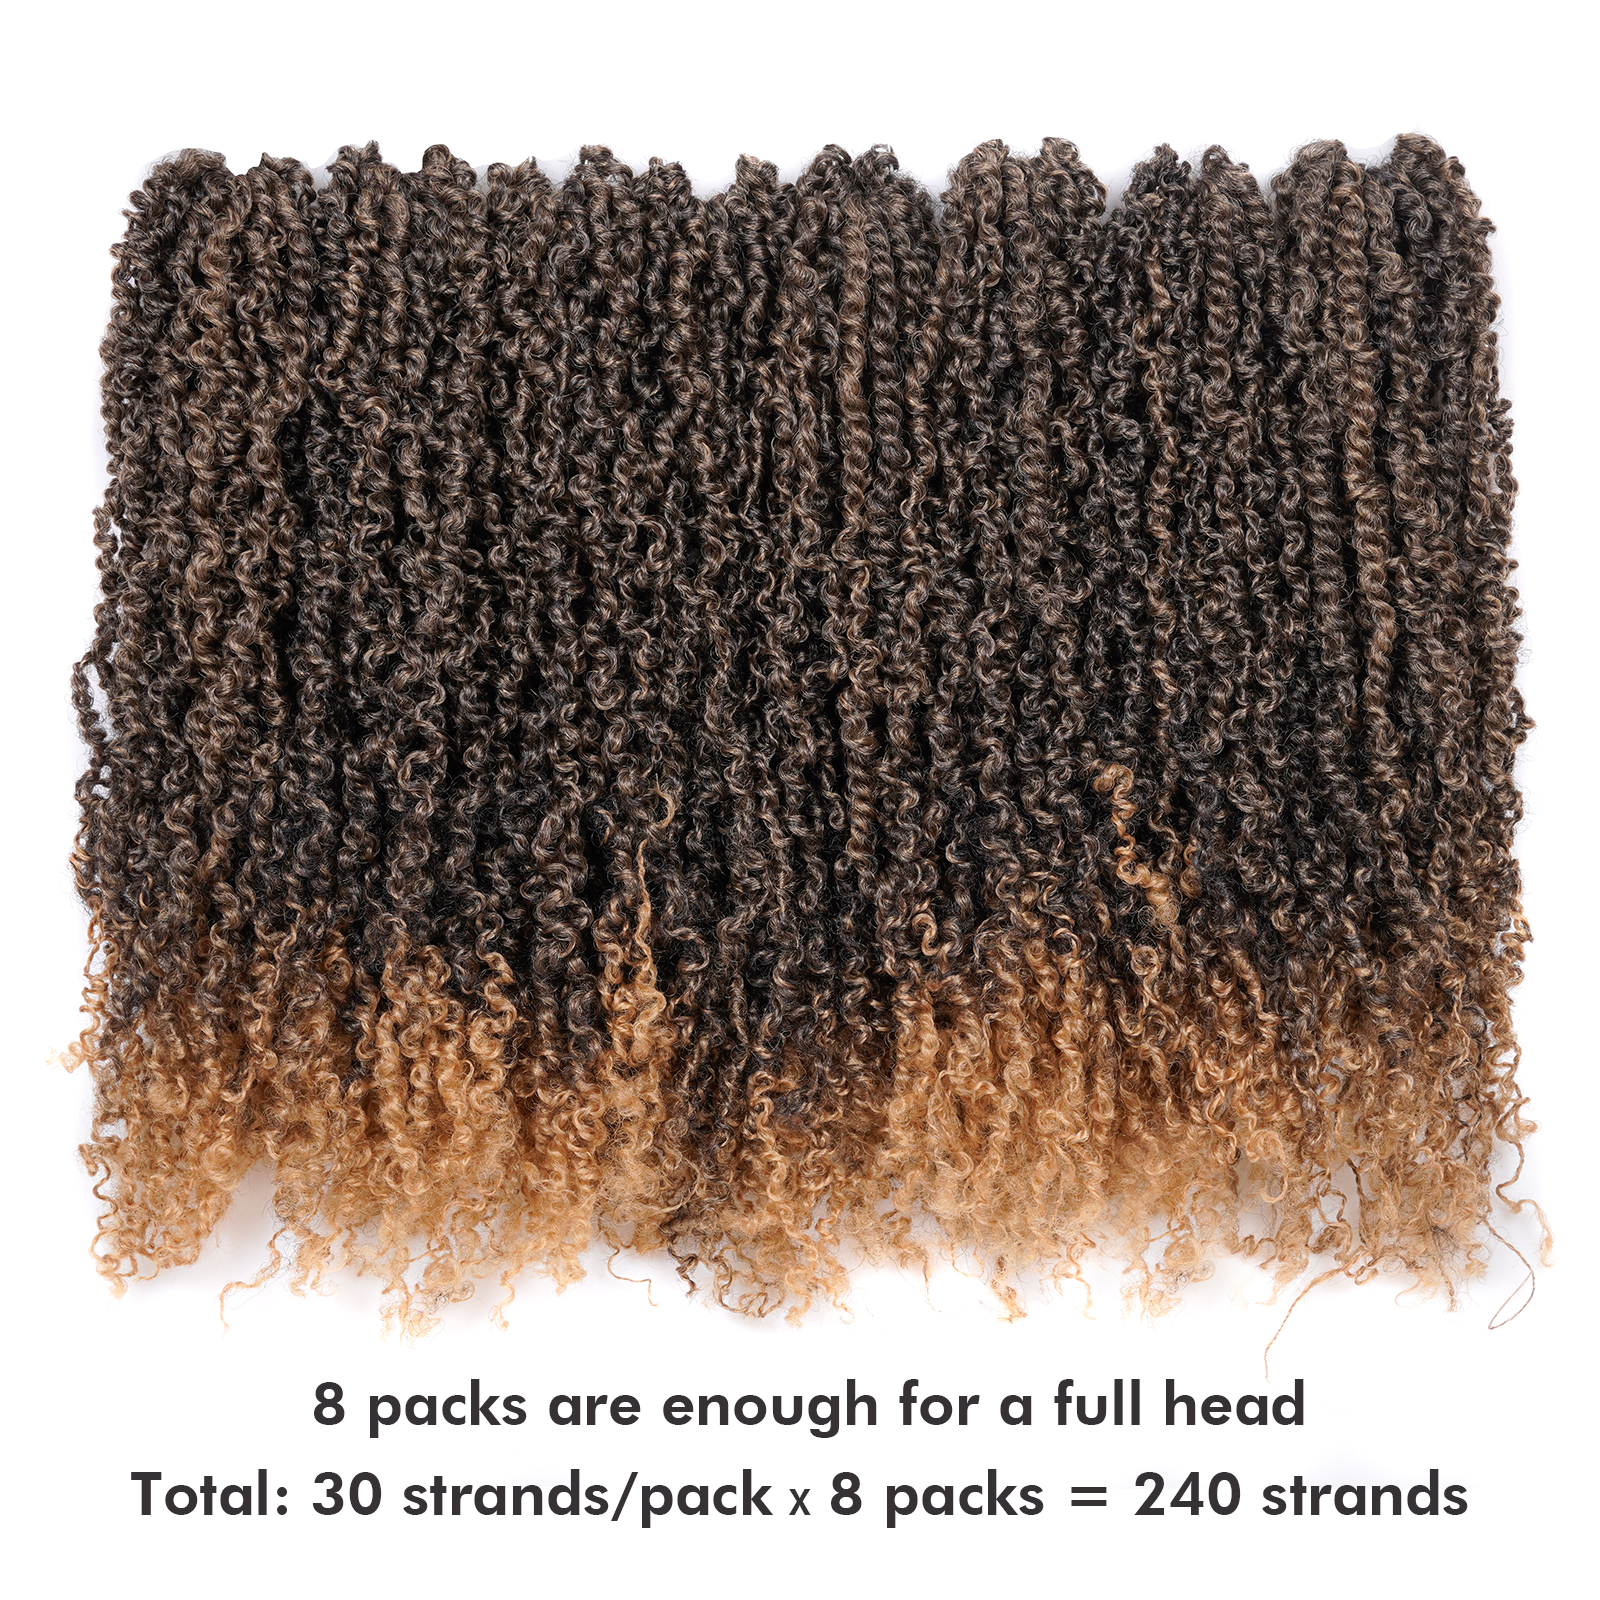 TOYOTRESS 8-16 Inch Pre Looped Mini Passion Twist Yanky Twist Braiding Hair with Curls 8 Packs Fluffy Marlybob Crochet Hair Pre Twisted Short Passion Twist Crochet Braids Synthetic Hair Extensions for Women